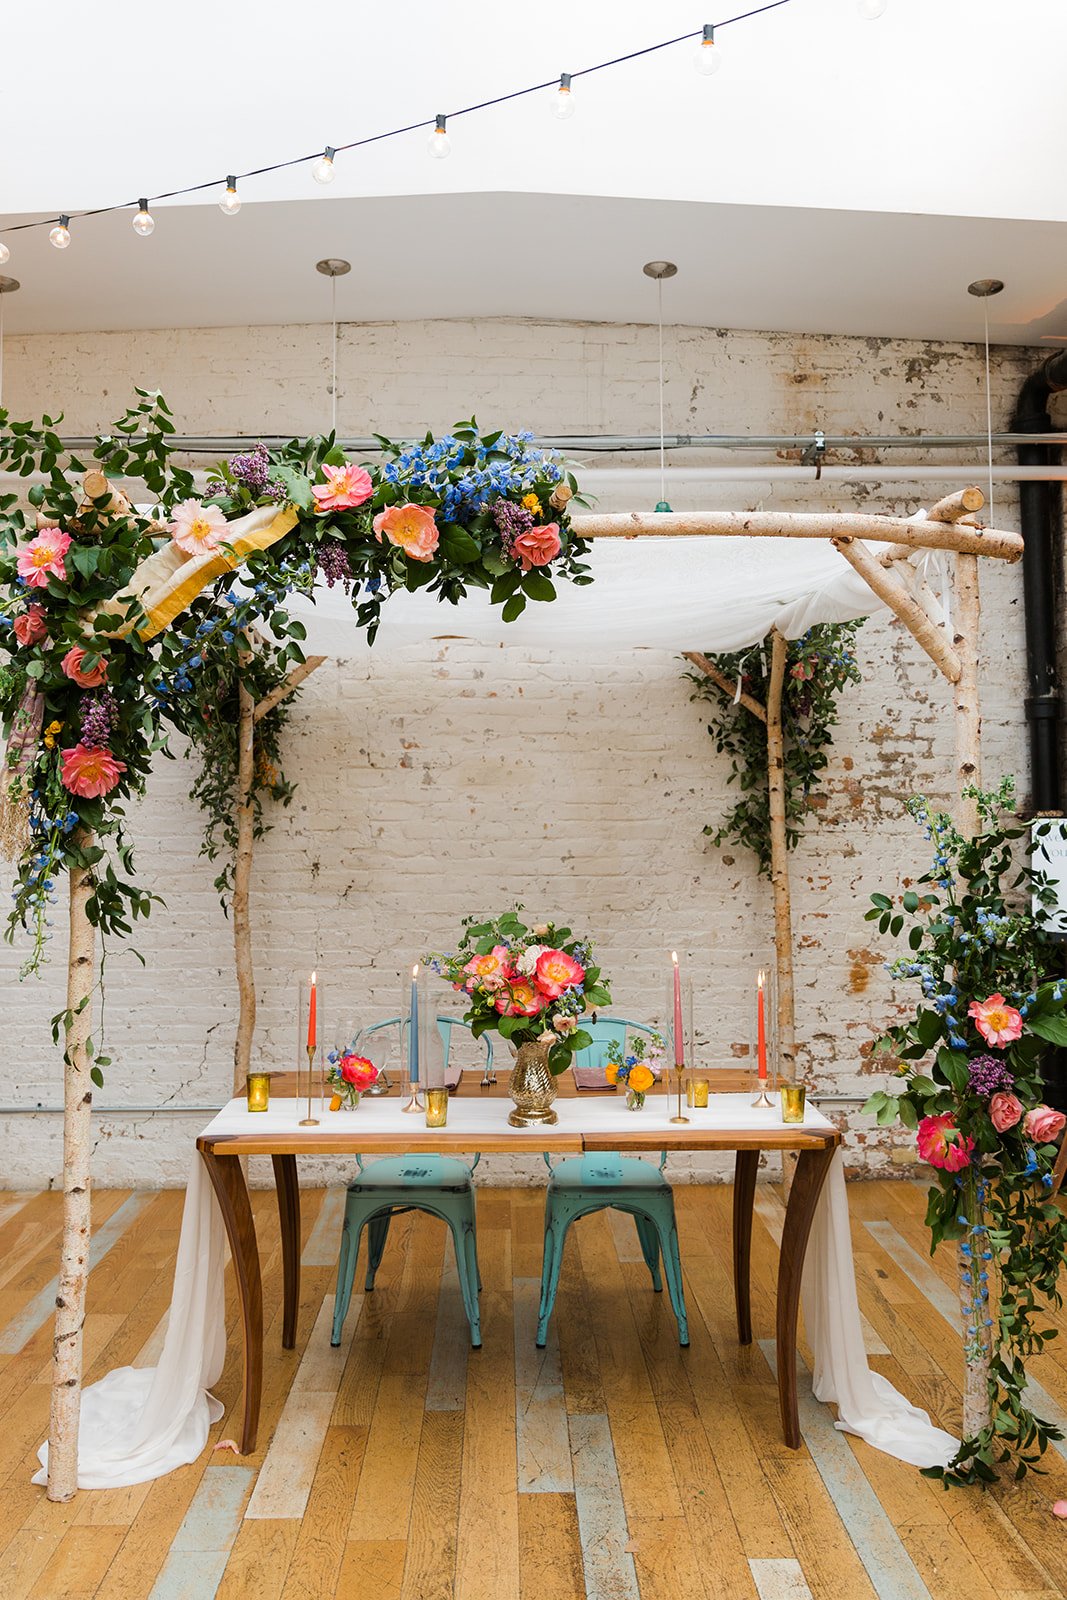  Documentary detail of wedding decor, head wedding sweetheart table with bright florals, tall colorful candles and airy white linens at nontraditional Jewish and Venezuelan wedding  at The Joinery Chicago an Industrial loft wedding venue In Logan Squ